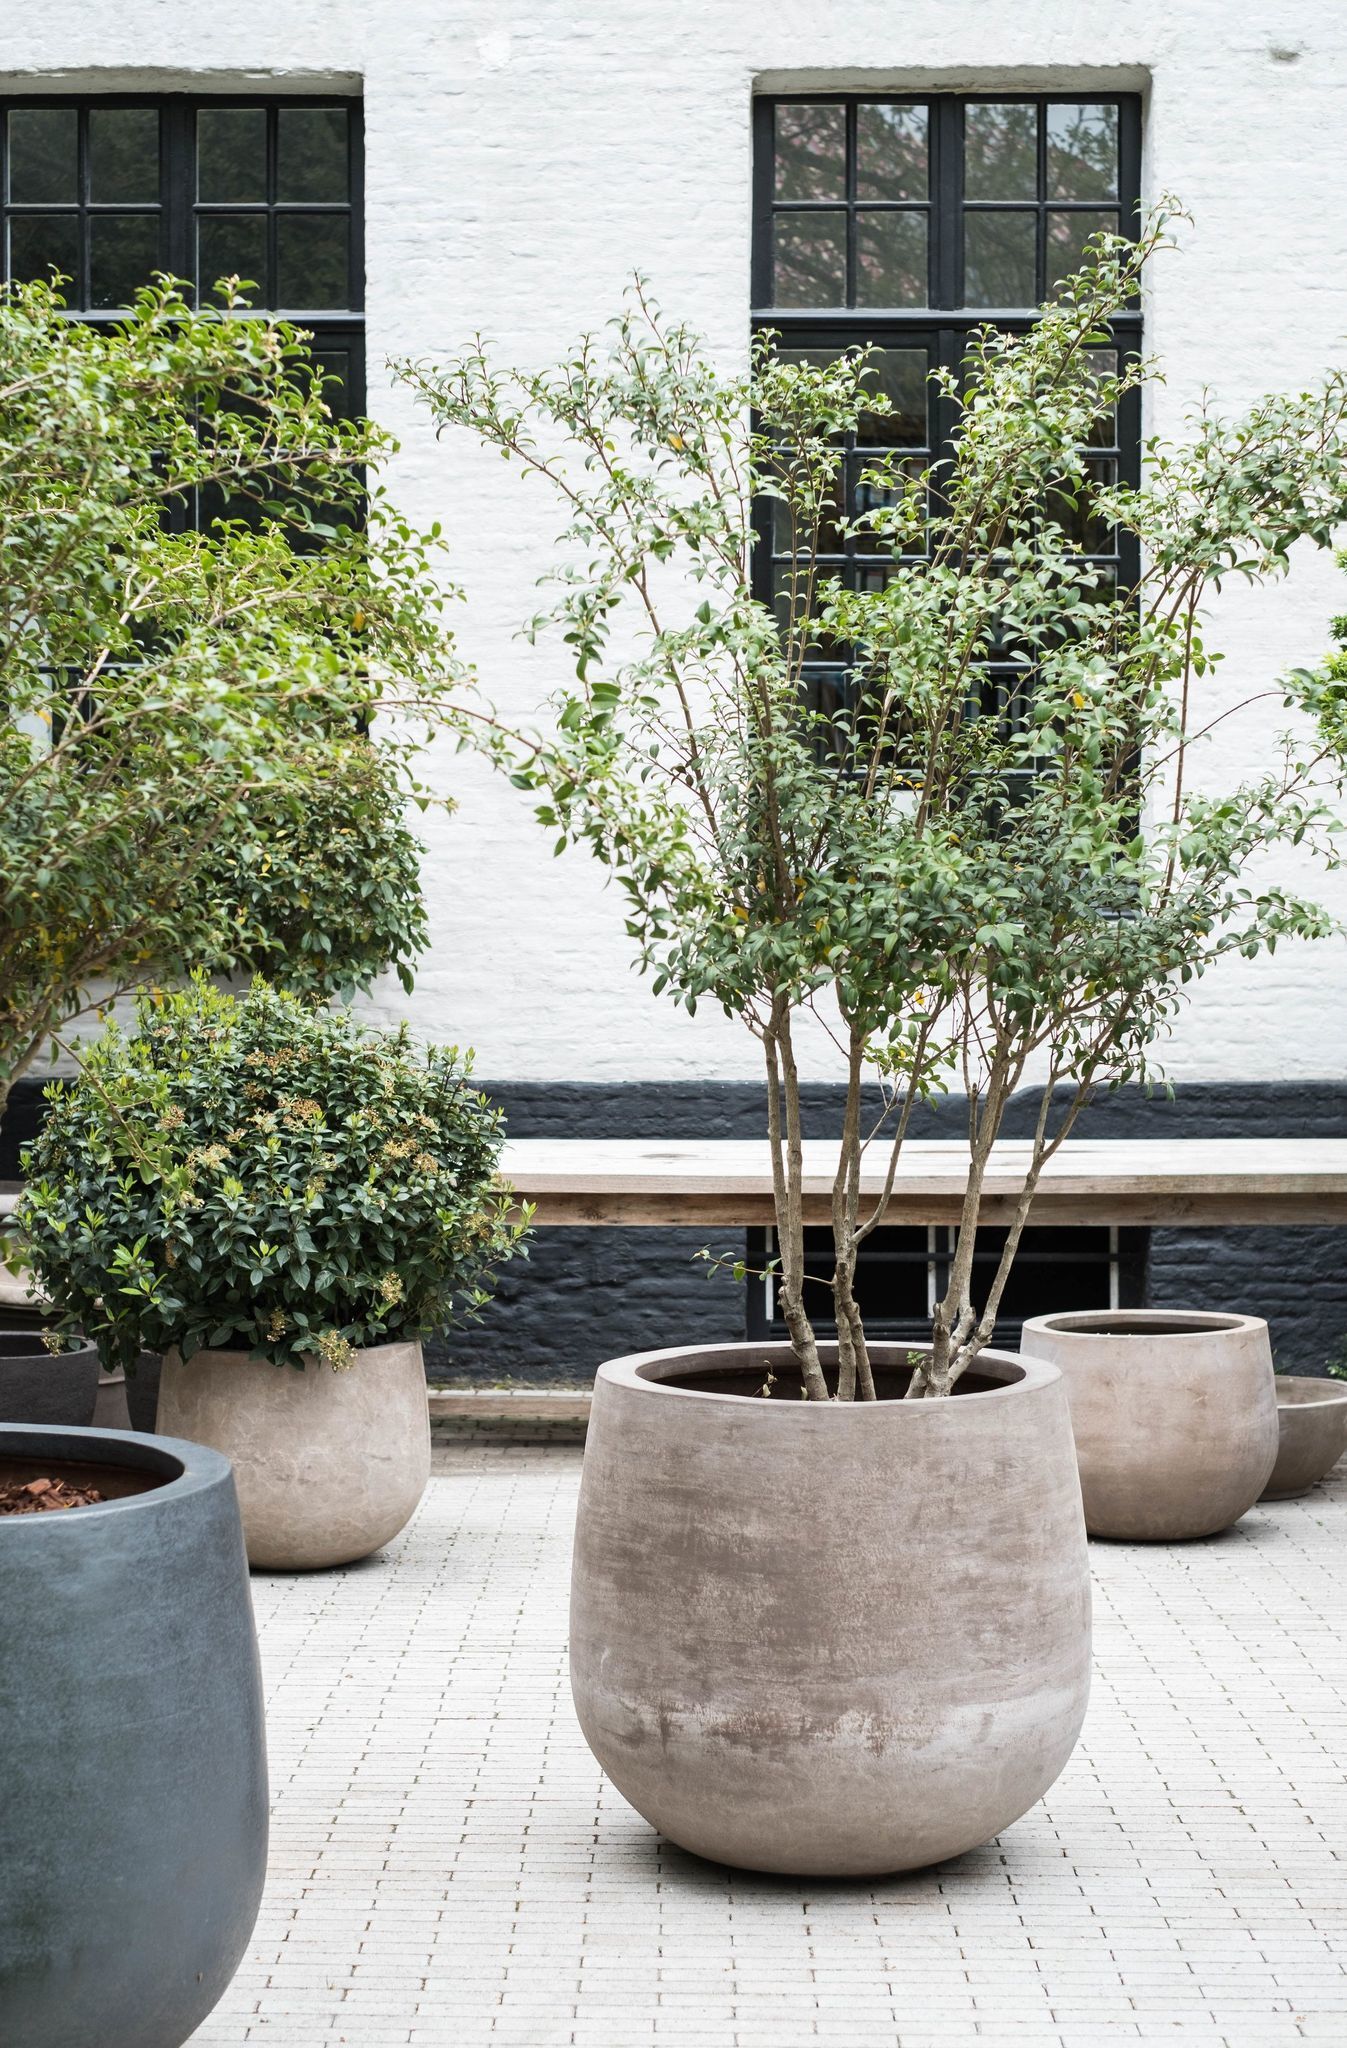 14 -Oversized pots bring character to the outdoor space